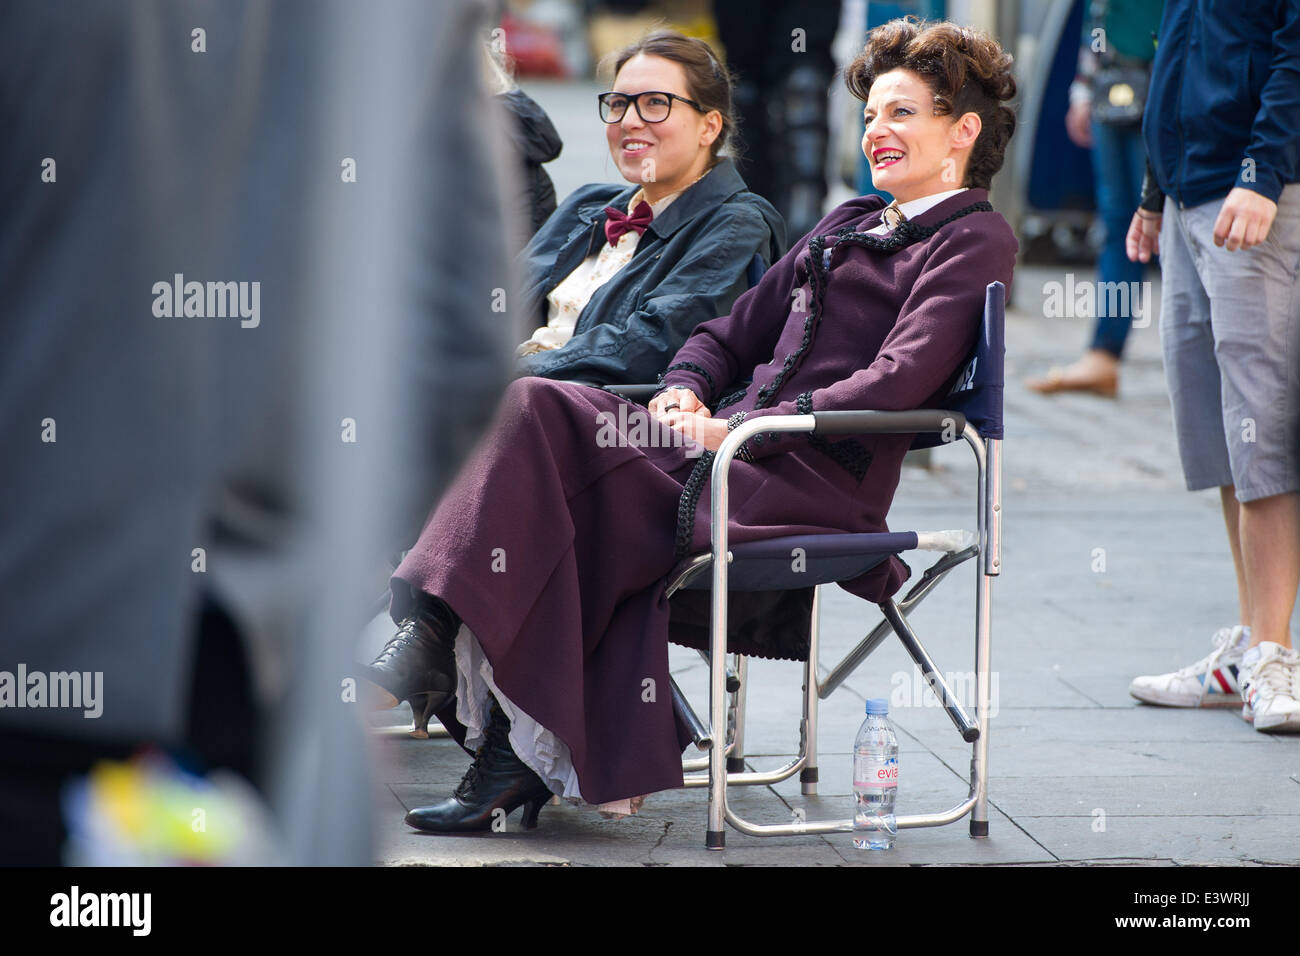 Cardiff, UK. 30th June 2014. The cast of BBC Doctor Who are spotted filming in Cardiff city centre. The Doctor (Peter Capaldi) was seen standing off against the Cybermen with UNIT soldiers and actress Michelle Gomez. Photo shows Ingrid Oliver (L) who plays Osgood, and Michelle Gomez (R) Credit:  Polly Thomas/Alamy Live News Stock Photo